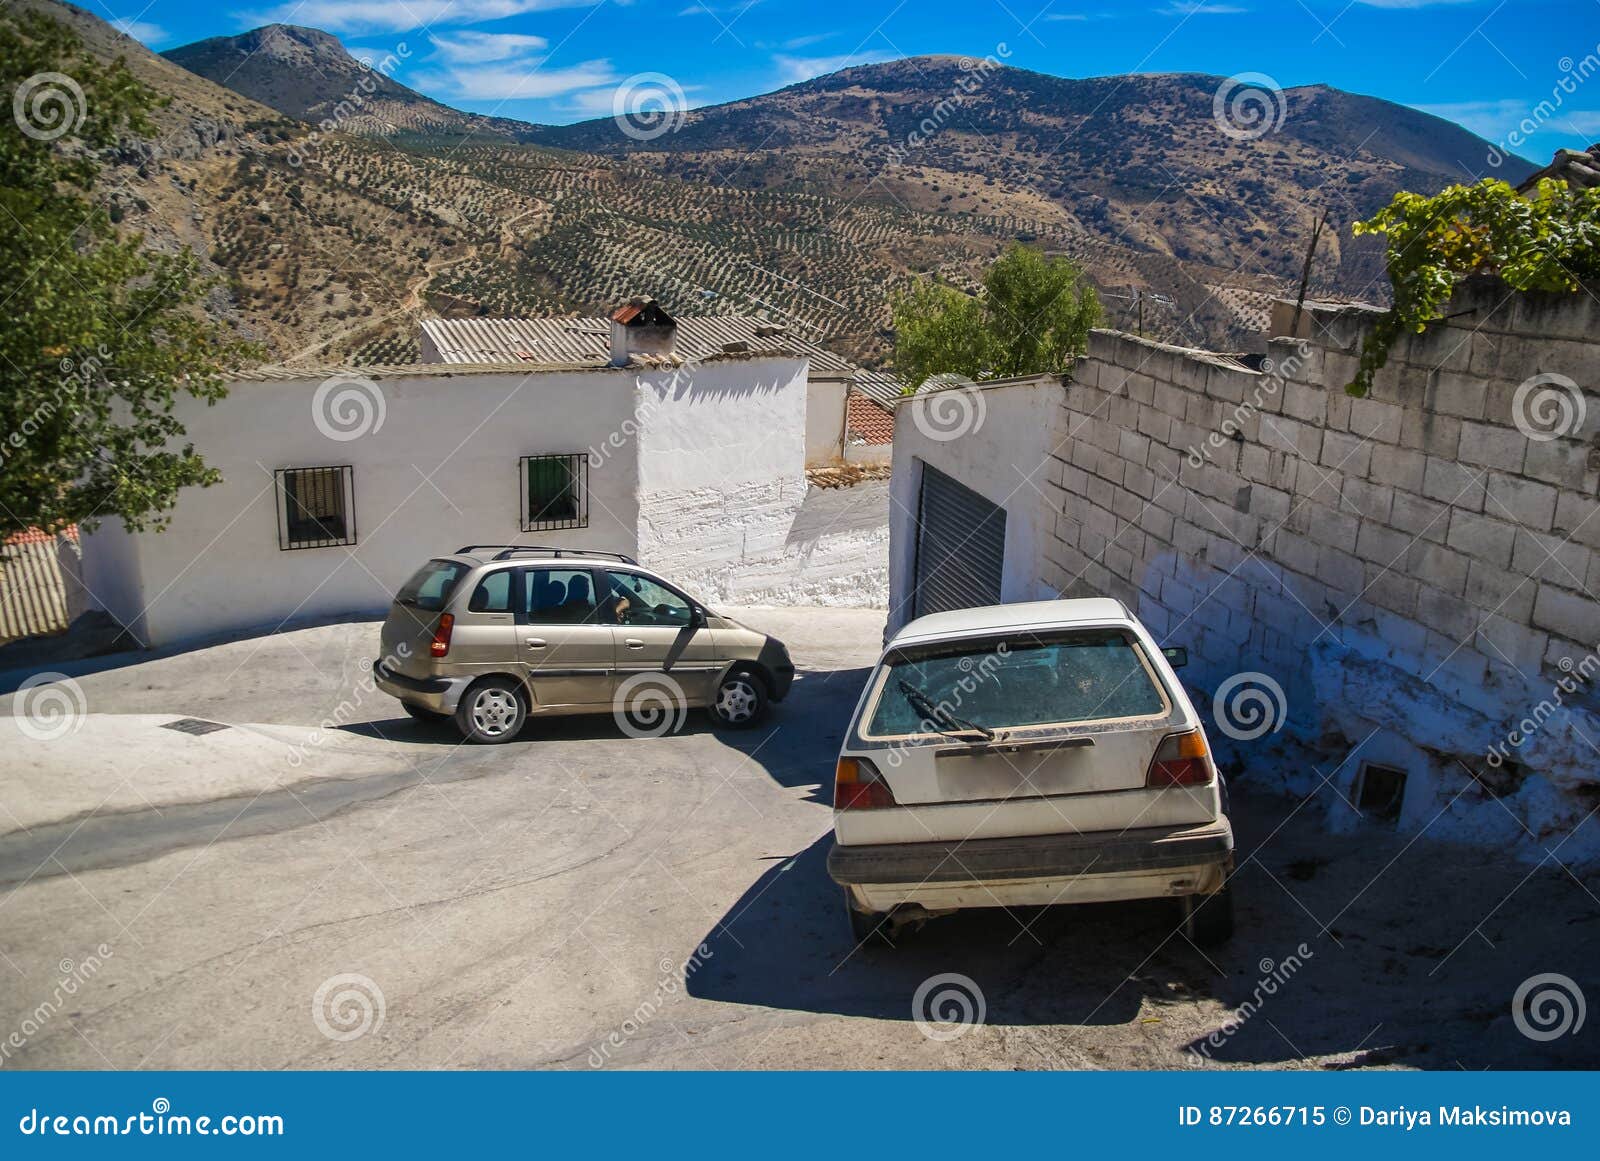 https://thumbs.dreamstime.com/z/mountain-street-small-town-colomera-spain-image-87266715.jpg